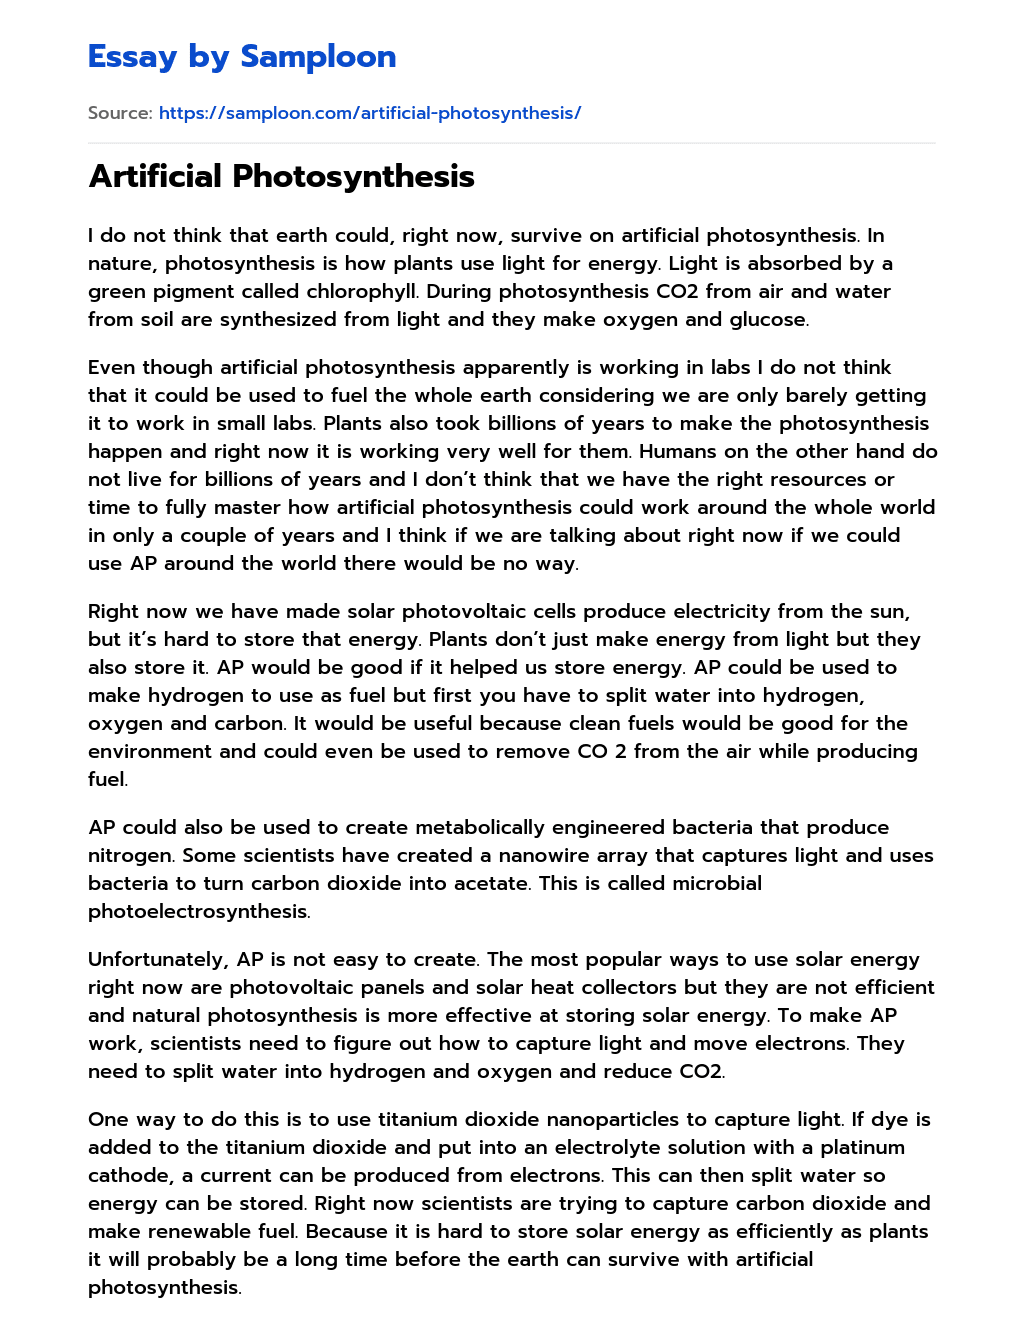 Artificial Photosynthesis essay